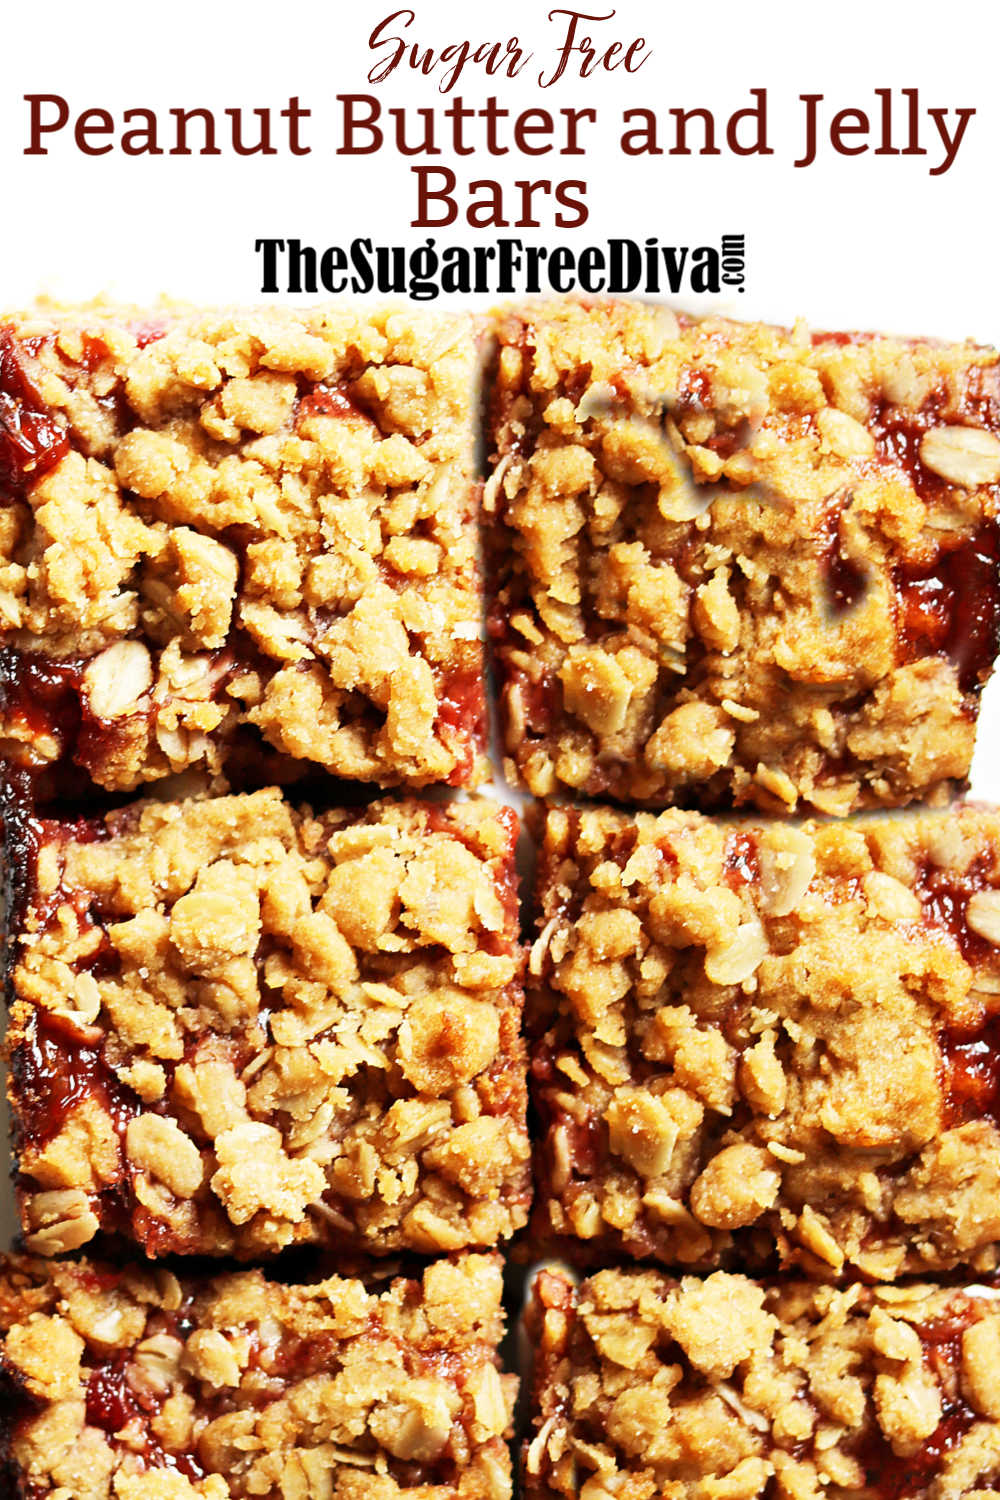 Sugar Free Peanut Butter and Jelly Bars